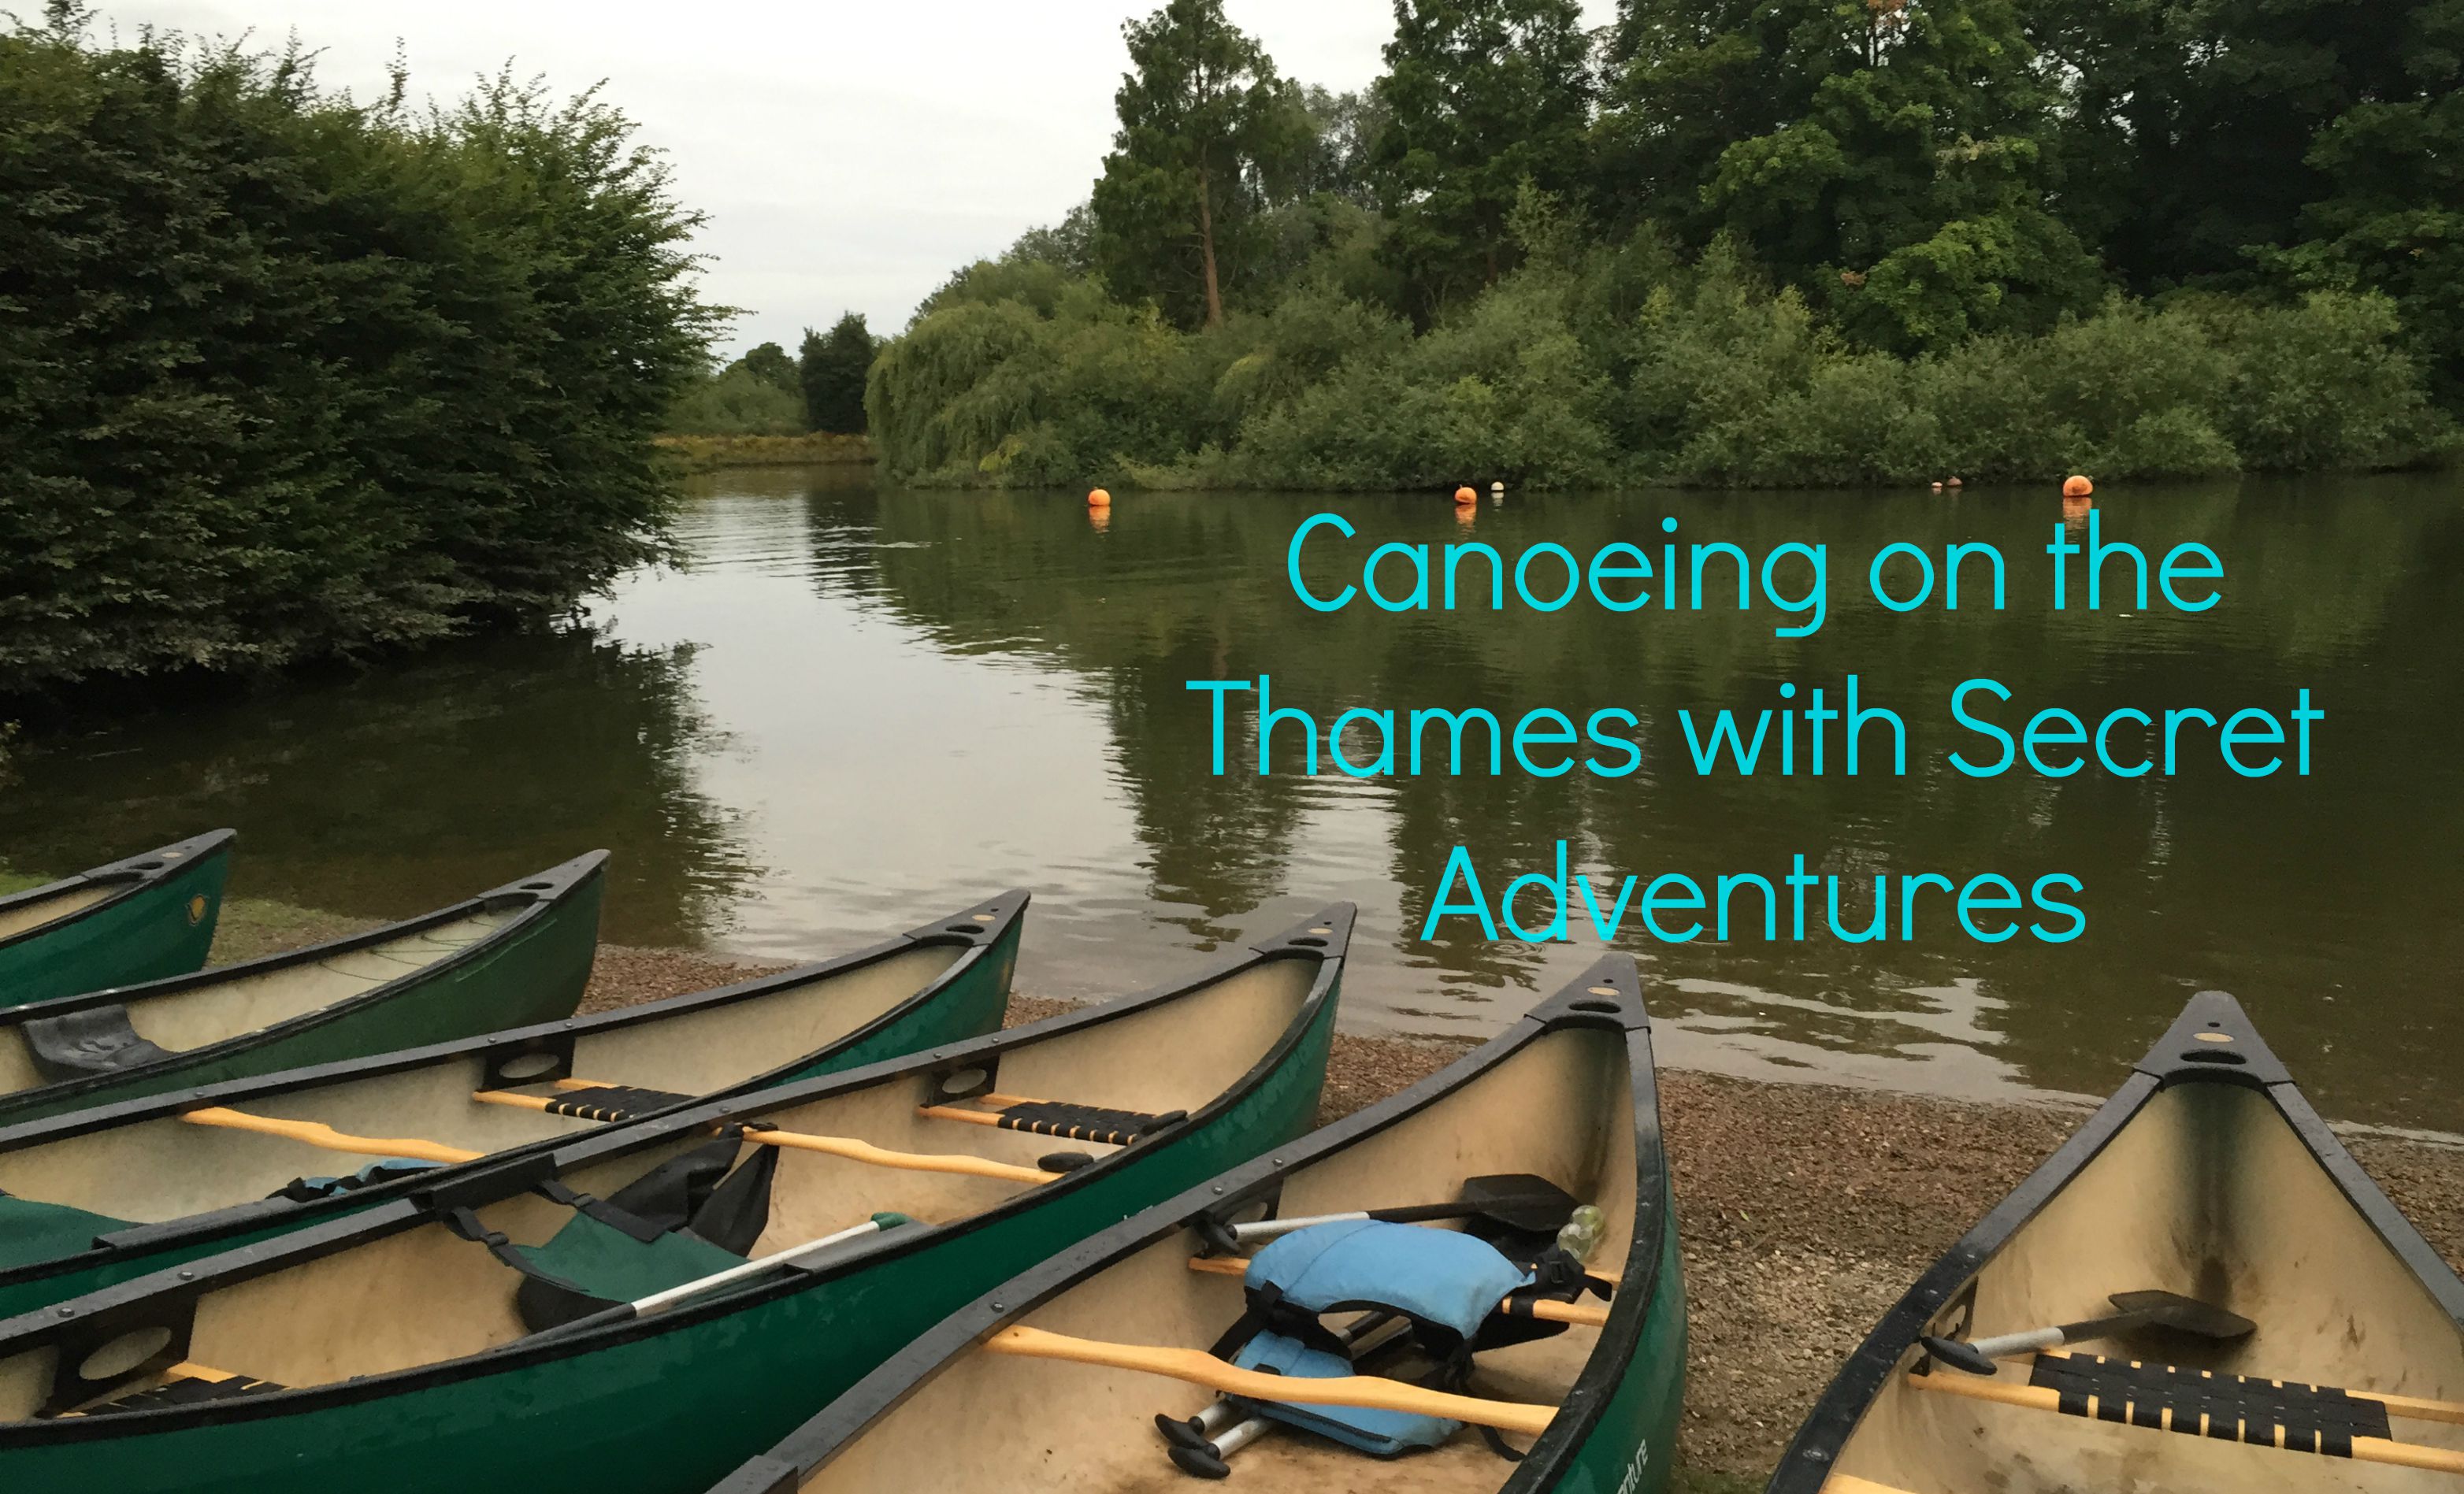 A secret adventure in Richmond – Canoeing the Thames